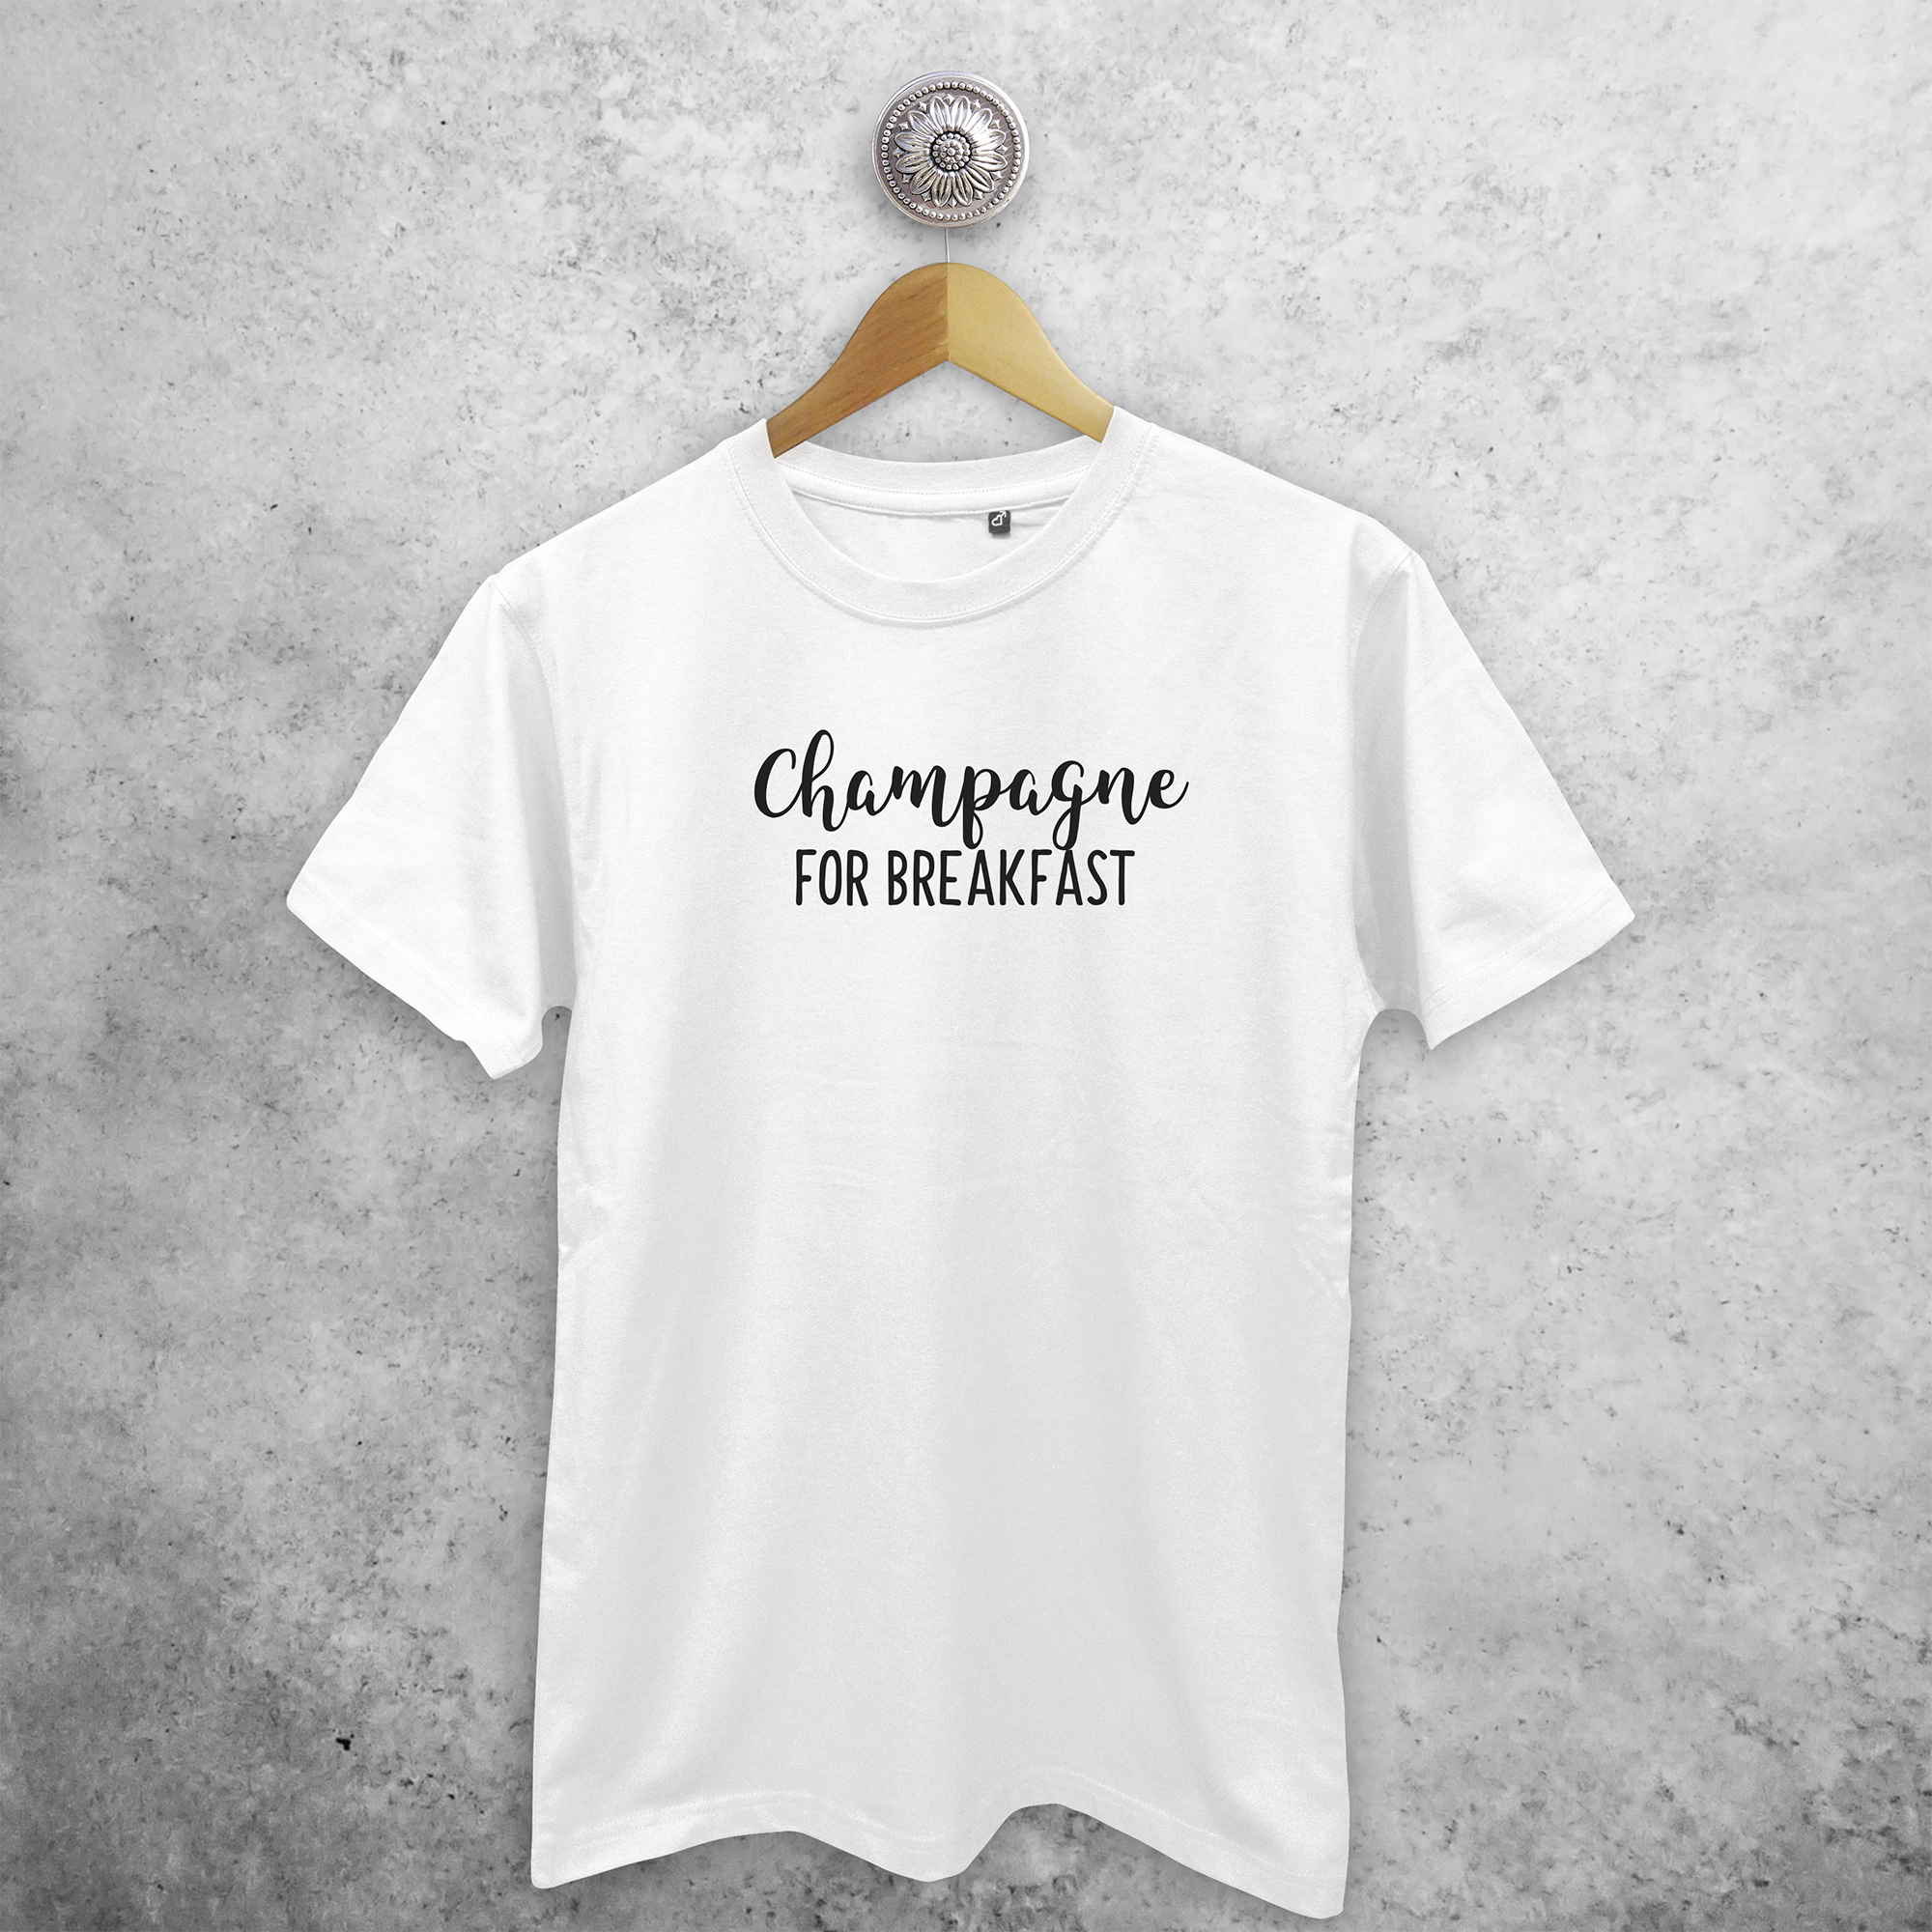 'Champagne for breakfast' adult shirt